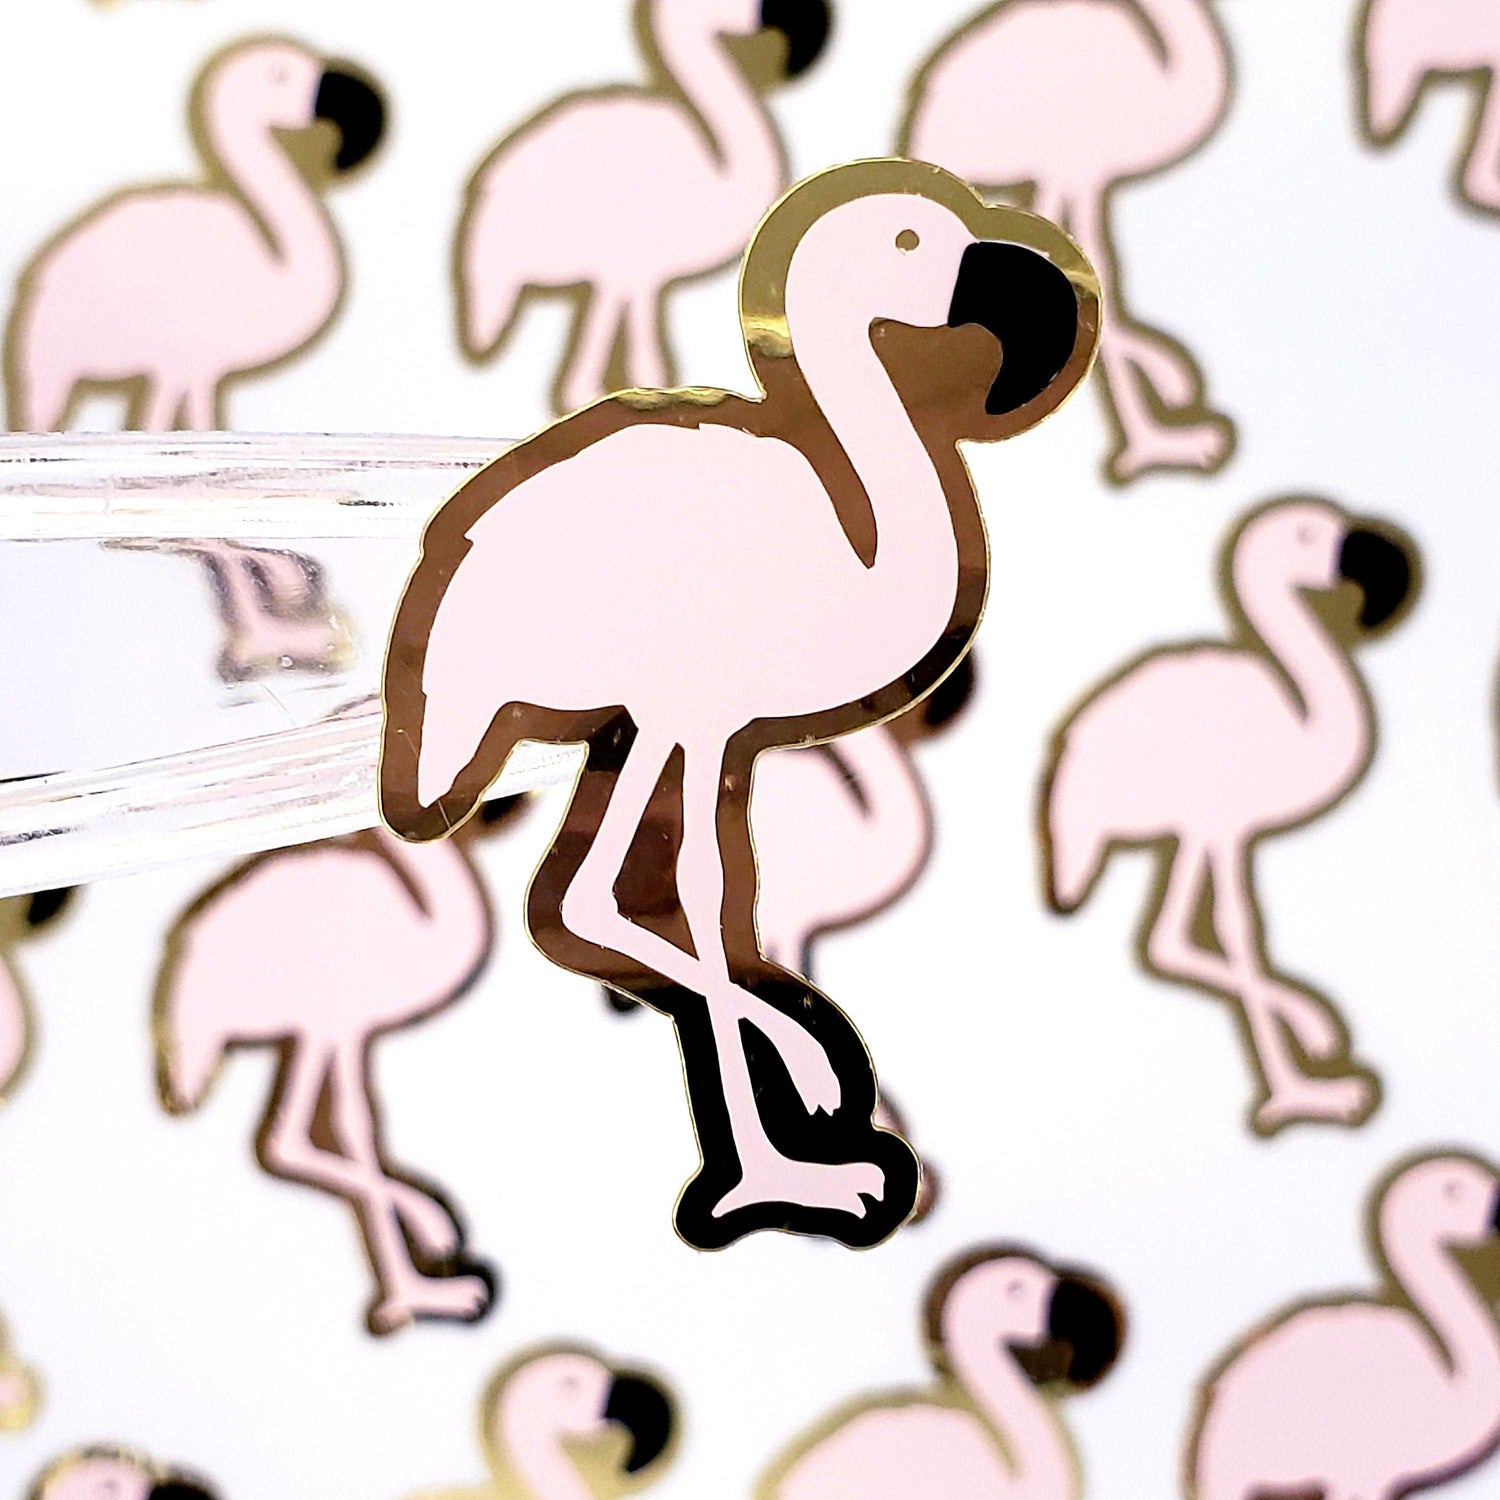 Flamingo Stickers, set of 25 blush pink and gold bird stickers for tropical themed parties, weddings and baby showers. Waterproof decals.